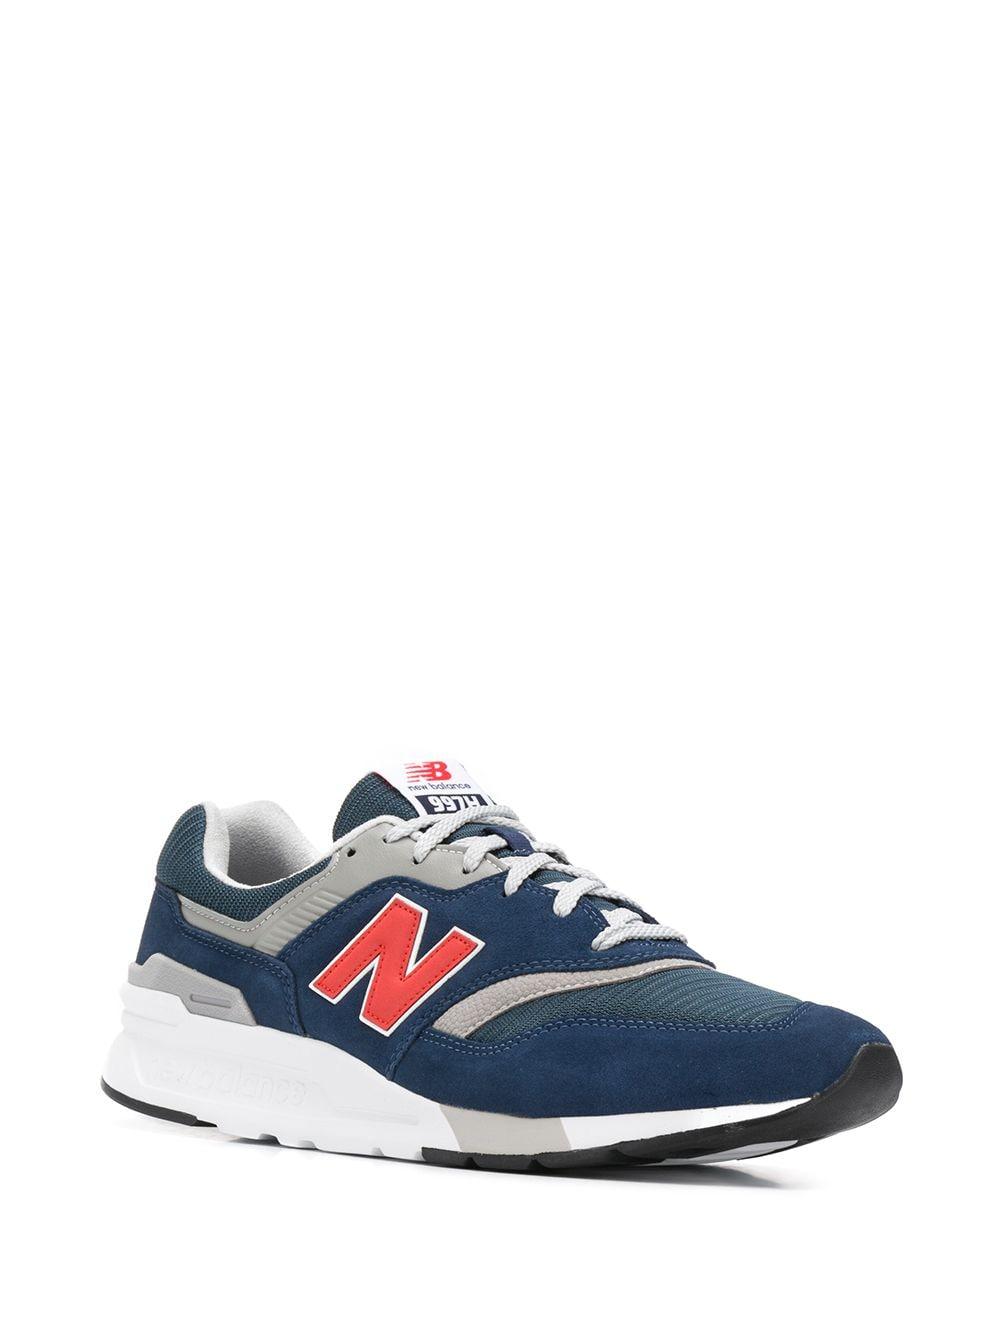 New Balance Suede 997 Sneakers in Navy (Blue) for Men - Save 22% - Lyst